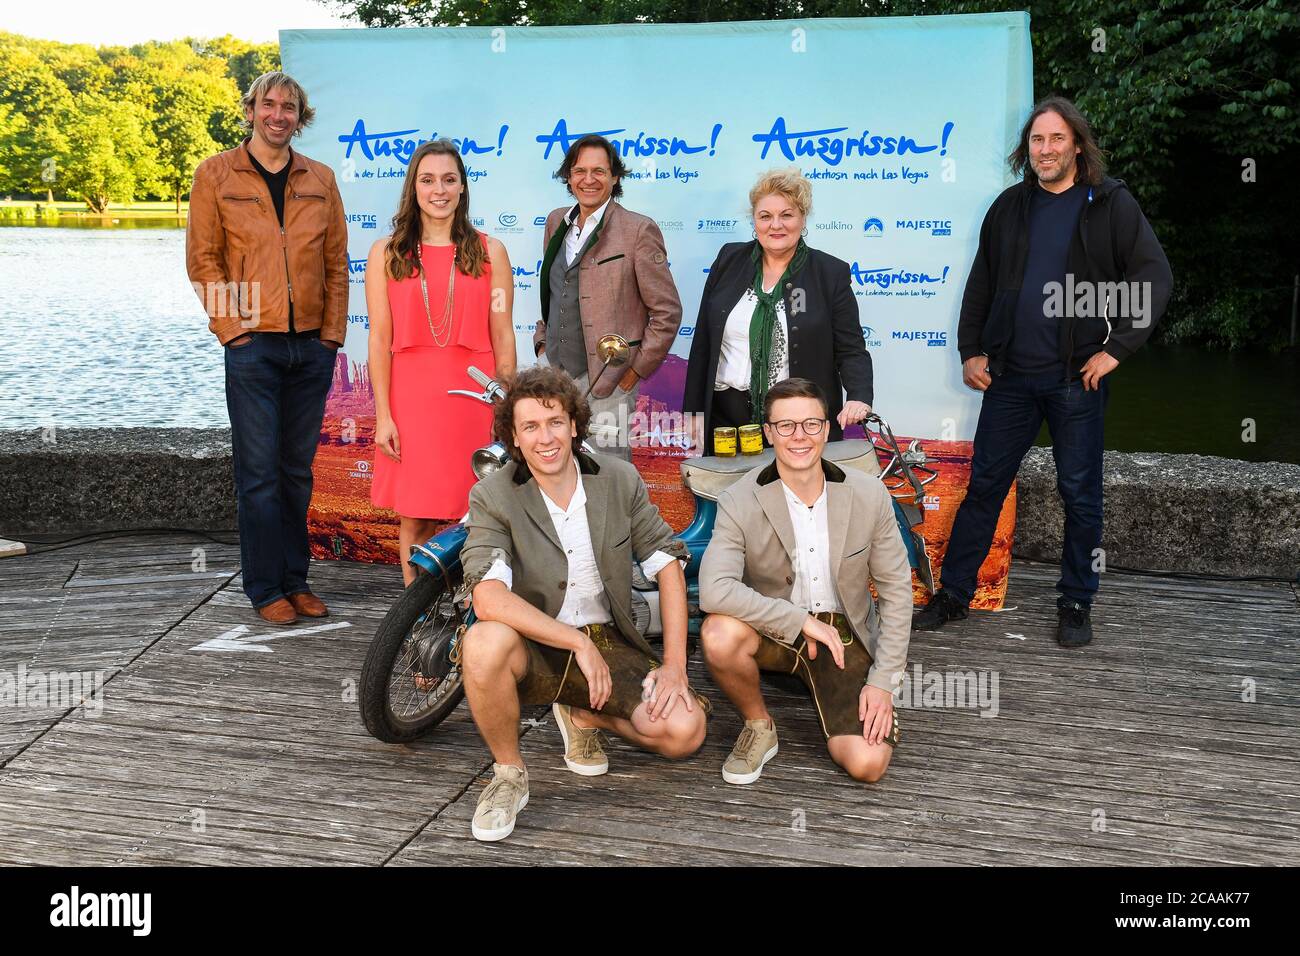 Munich, Germany. 05th Aug, 2020. The actors Arnd Schimkat (back, l-r), Stephanie Liebl, Winfried Frey, Angelika Sedlmeier, Roland Hefter, Julian Wittmann (front, l-r) and Thomas Wittmann, taken during the open air cinema "Kino, Mond und Sterne" at the premiere of the film "Ausgrissn! The film will be released in German cinemas on 13.08.2020. Credit: Tobias Hase/dpa/Alamy Live News Stock Photo